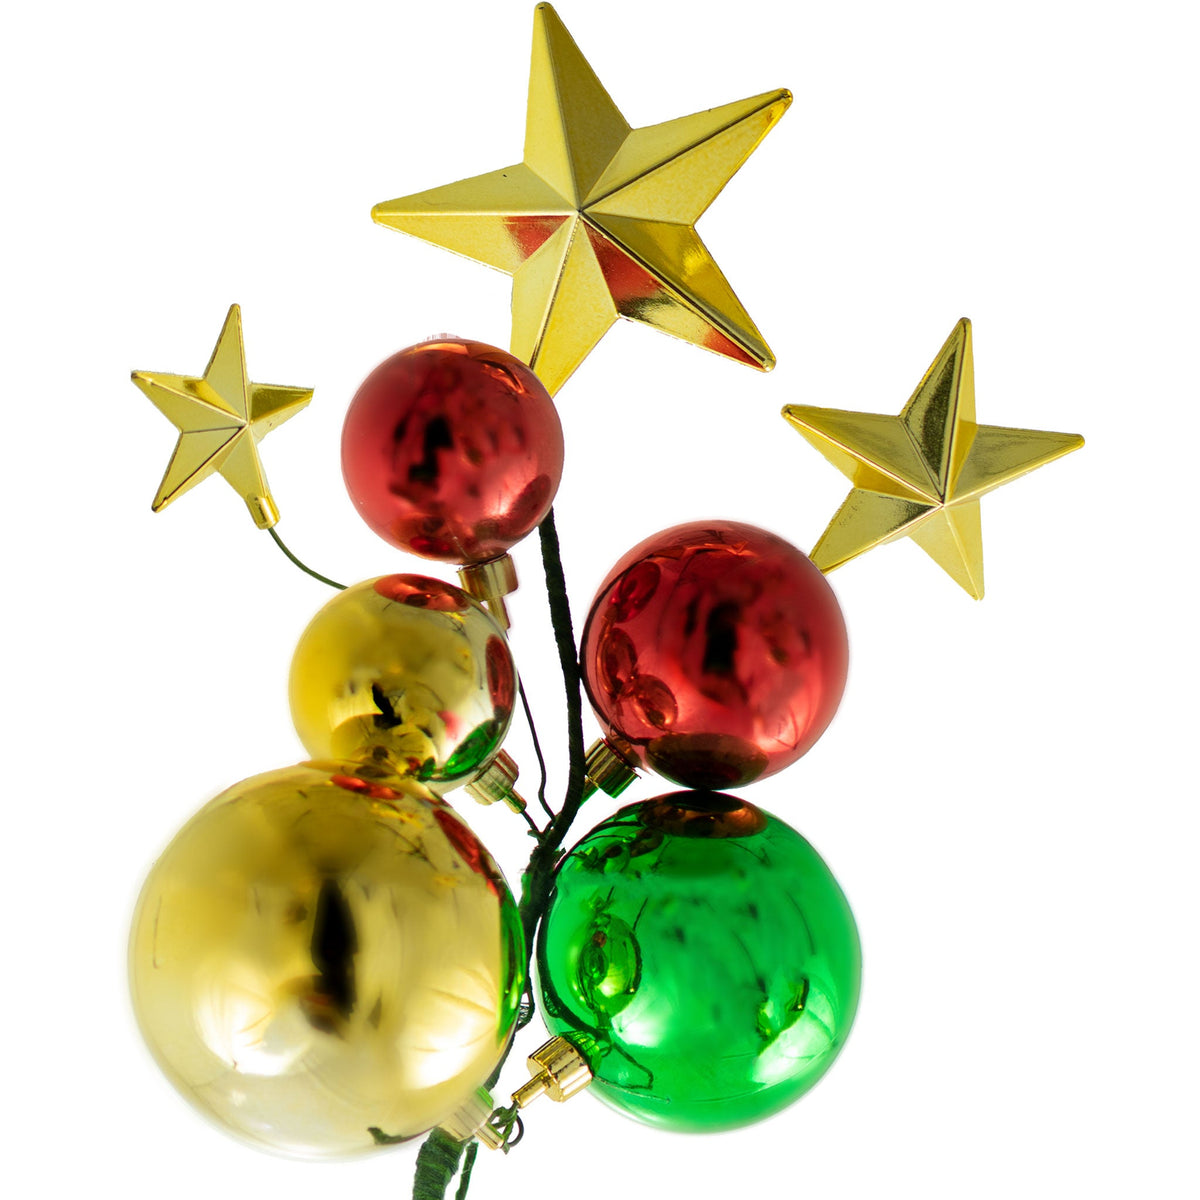 Decorate your Christmas Trees, Garlands, and Wreaths with Lee Display's San Jose style Ball Ornament Cluster